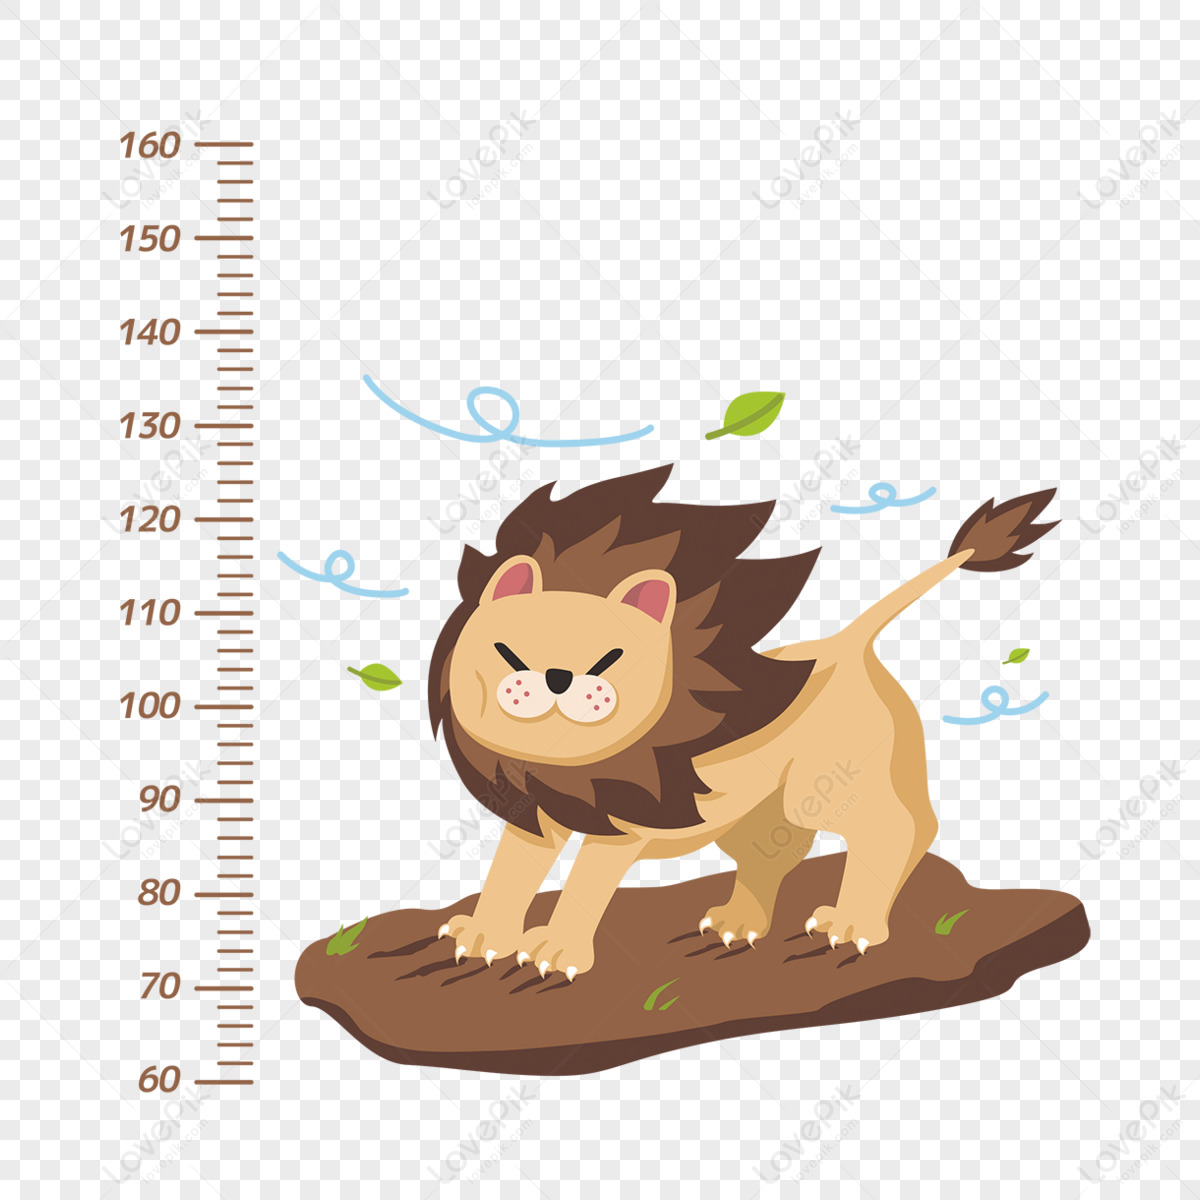 Height Measurement Clipart PNG Images, Children S Height Measurement  Layered Material, Material, Child, Creative Child PNG Image For Free  Download